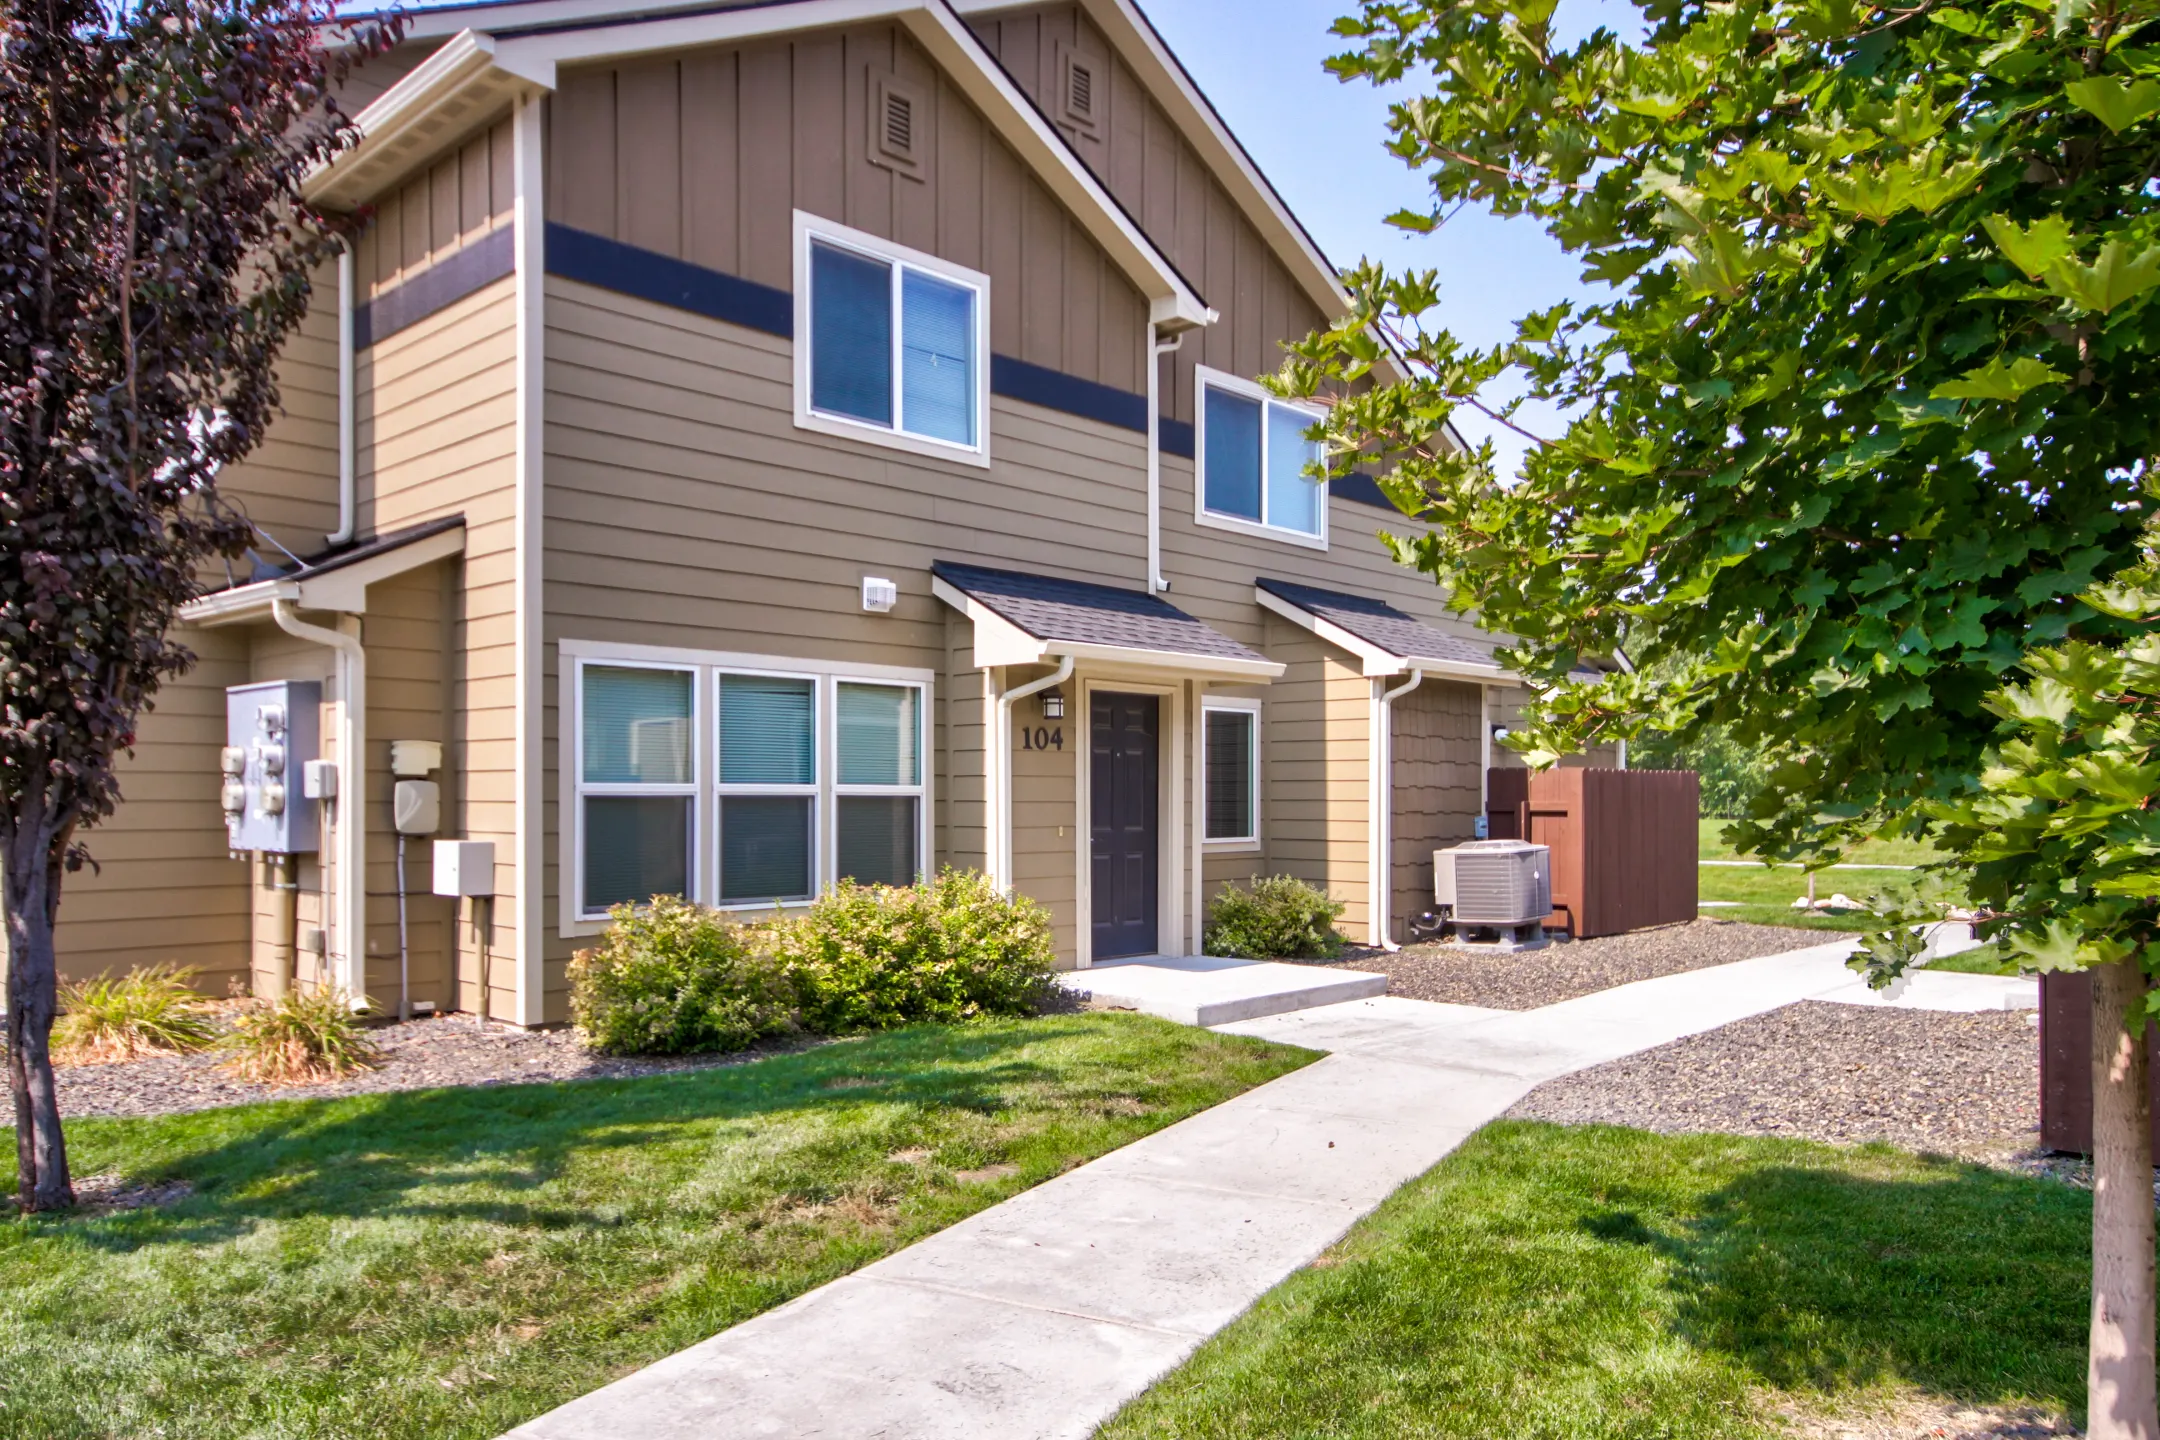 Building - Cantabria Townhomes - Boise, ID